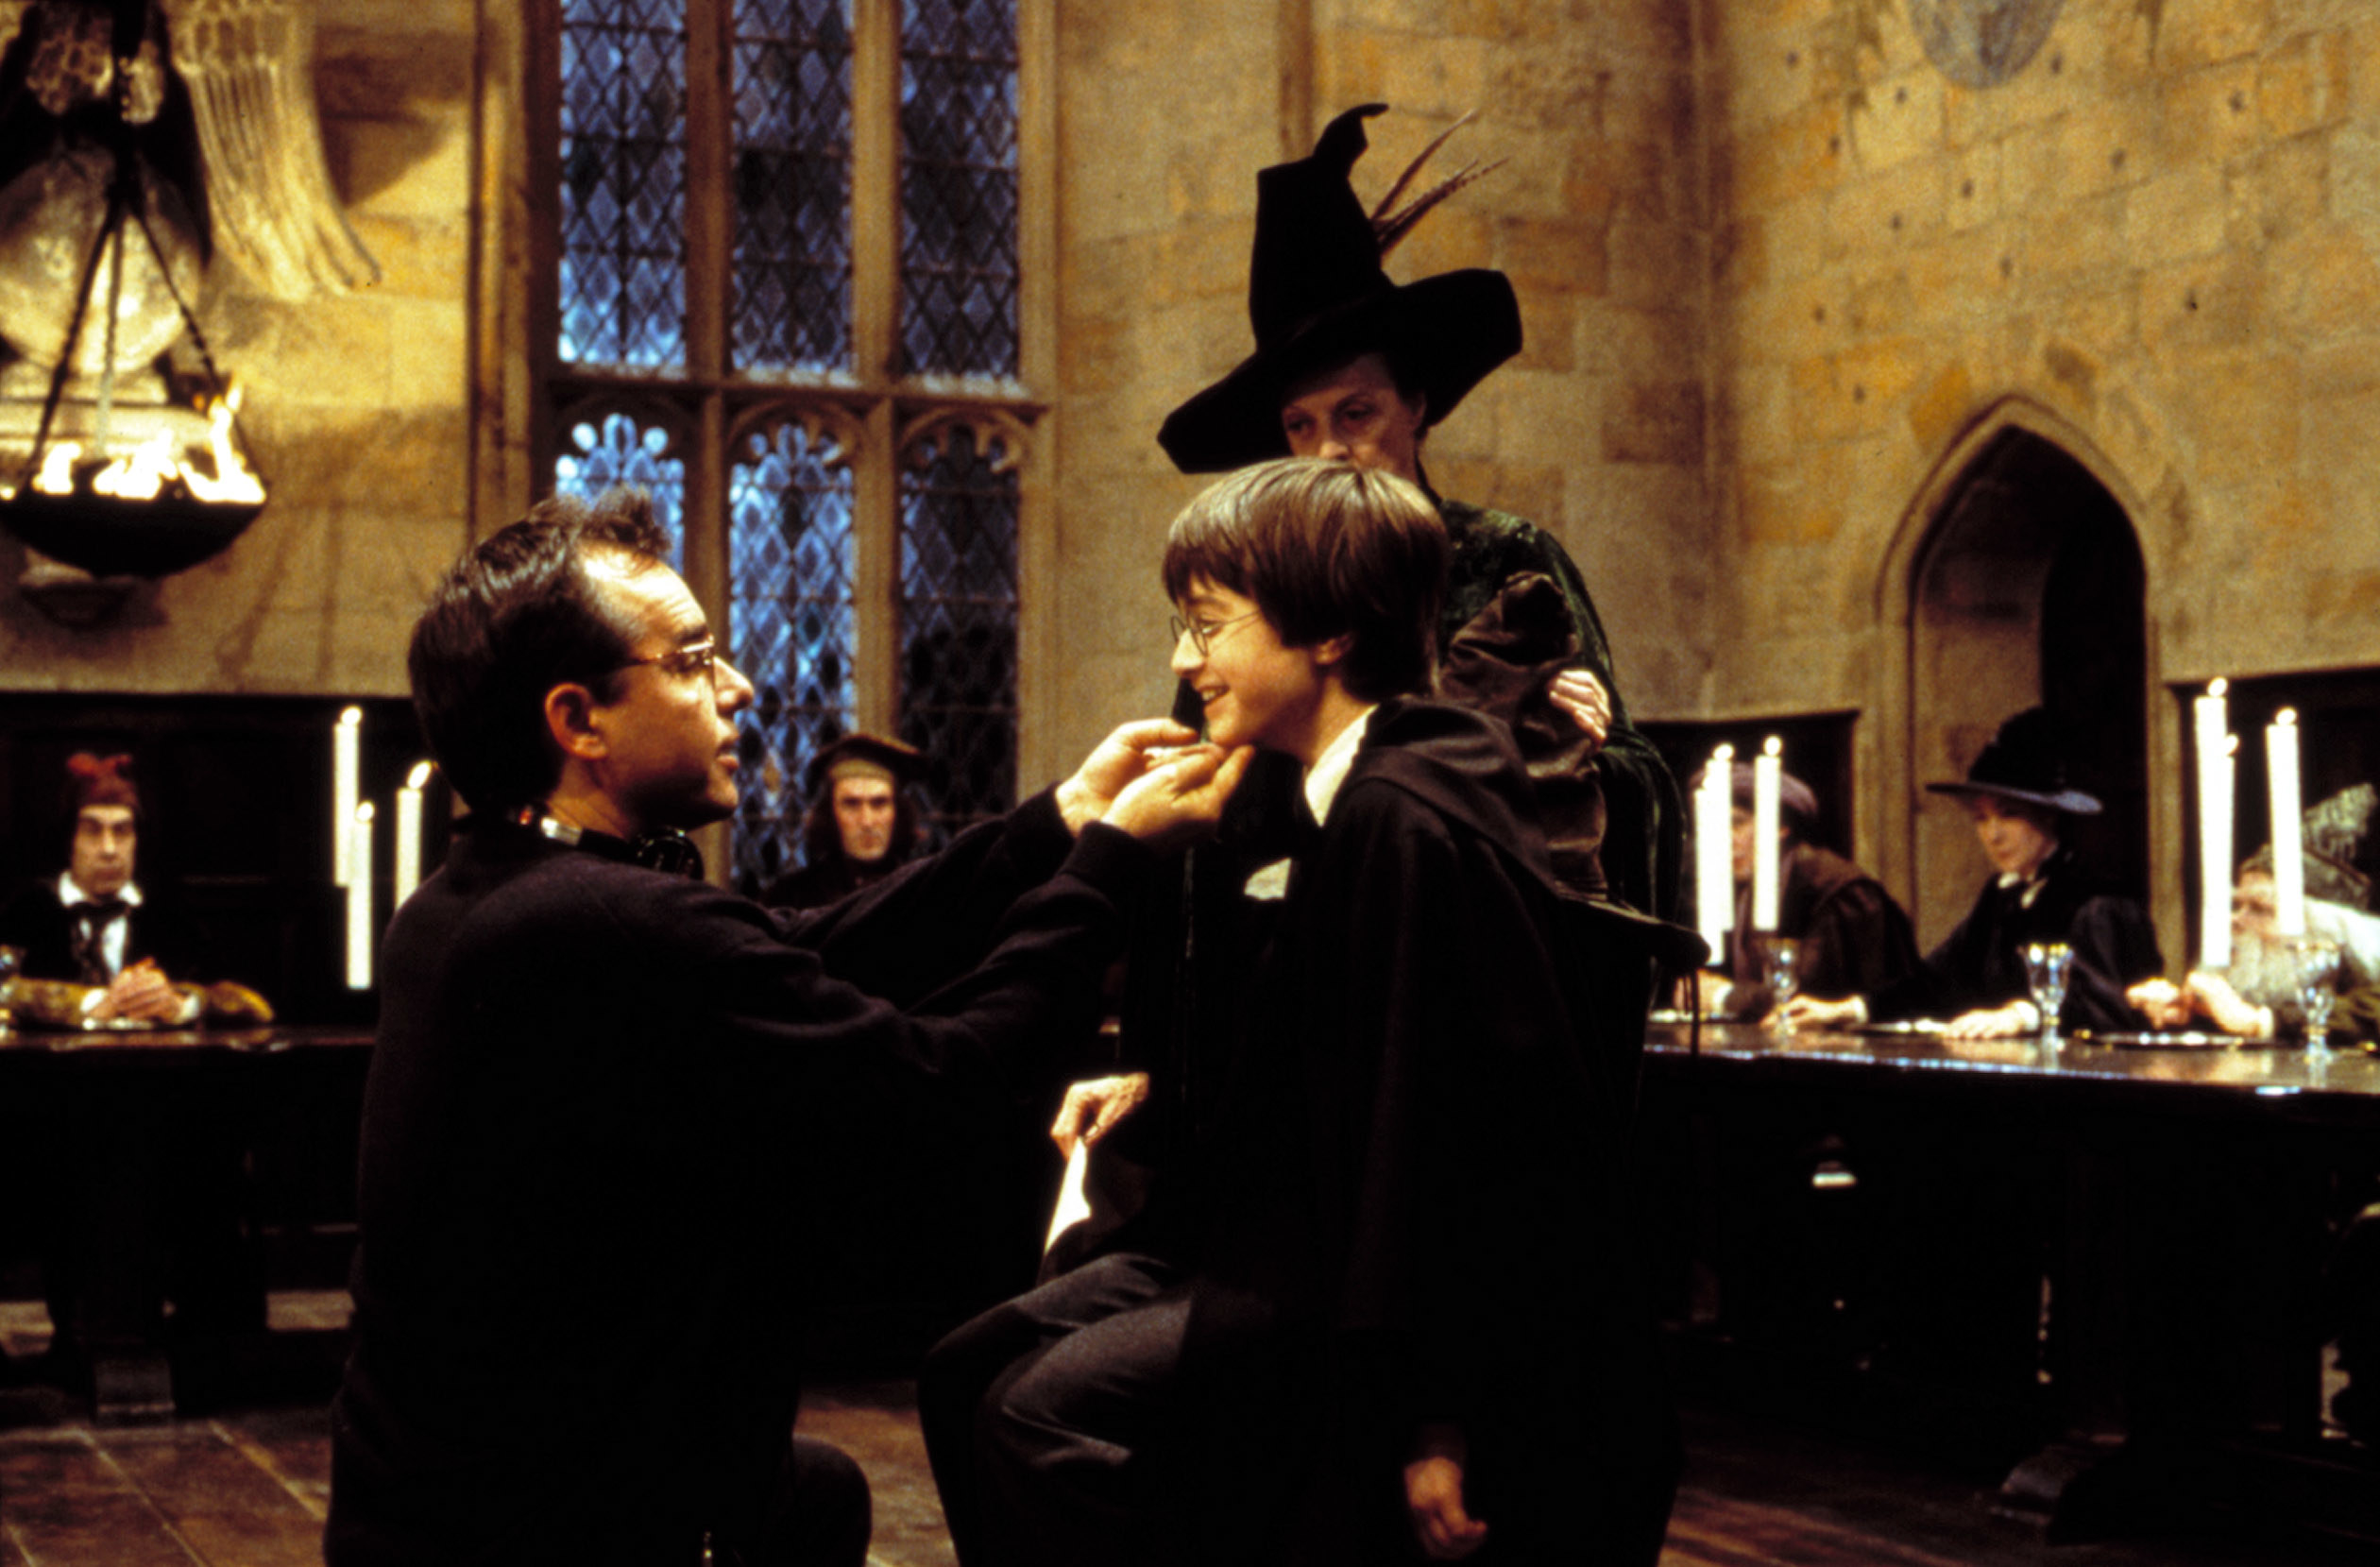 Director Chris Columbus, Daniel Radcliffe, and Maggie Smith on set